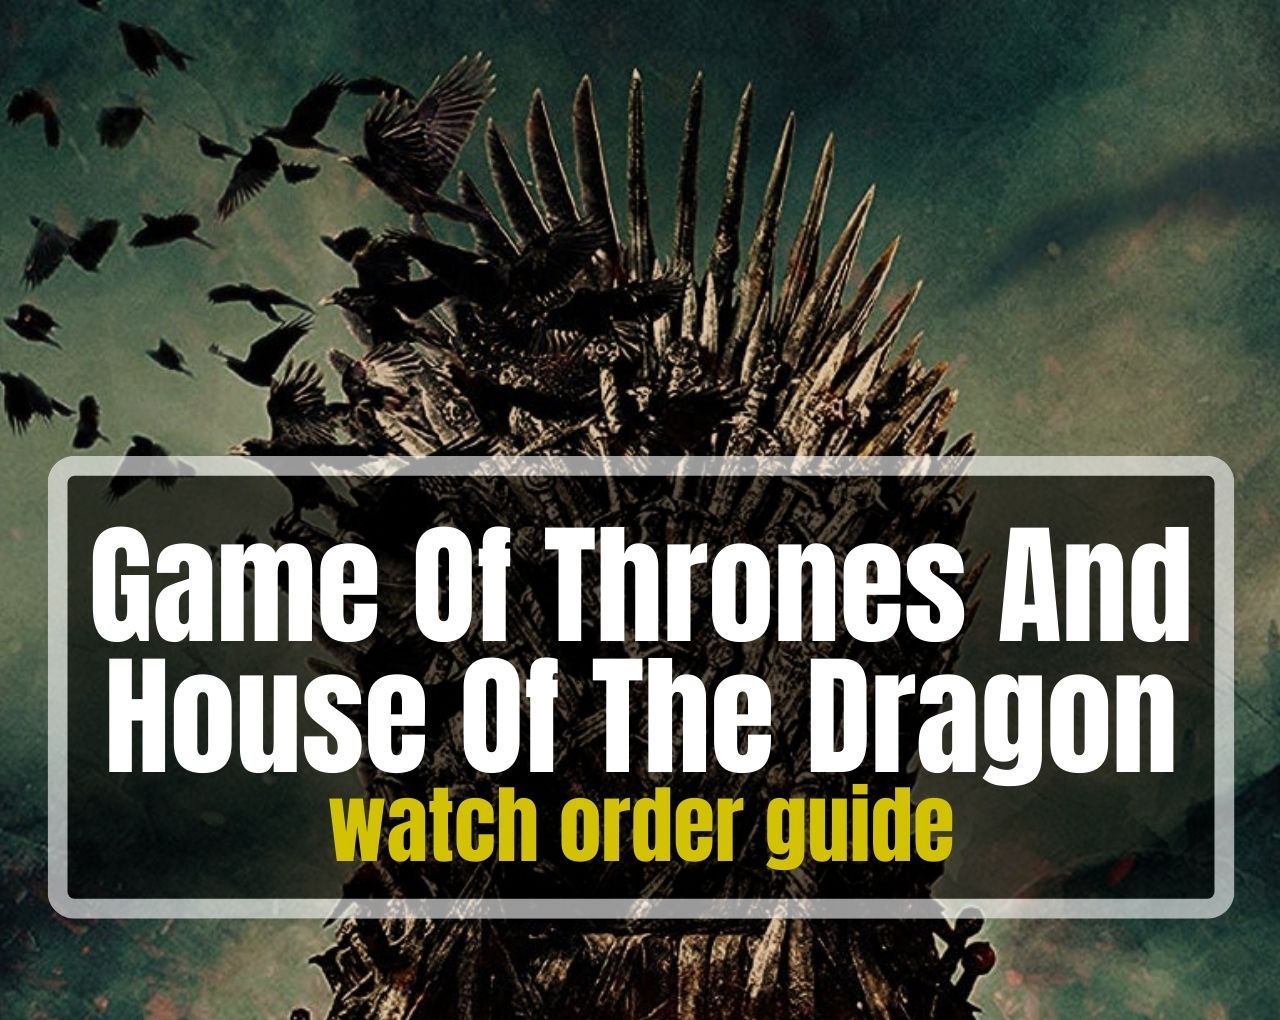 Game Of Thrones And House Of The Dragon watch order guide